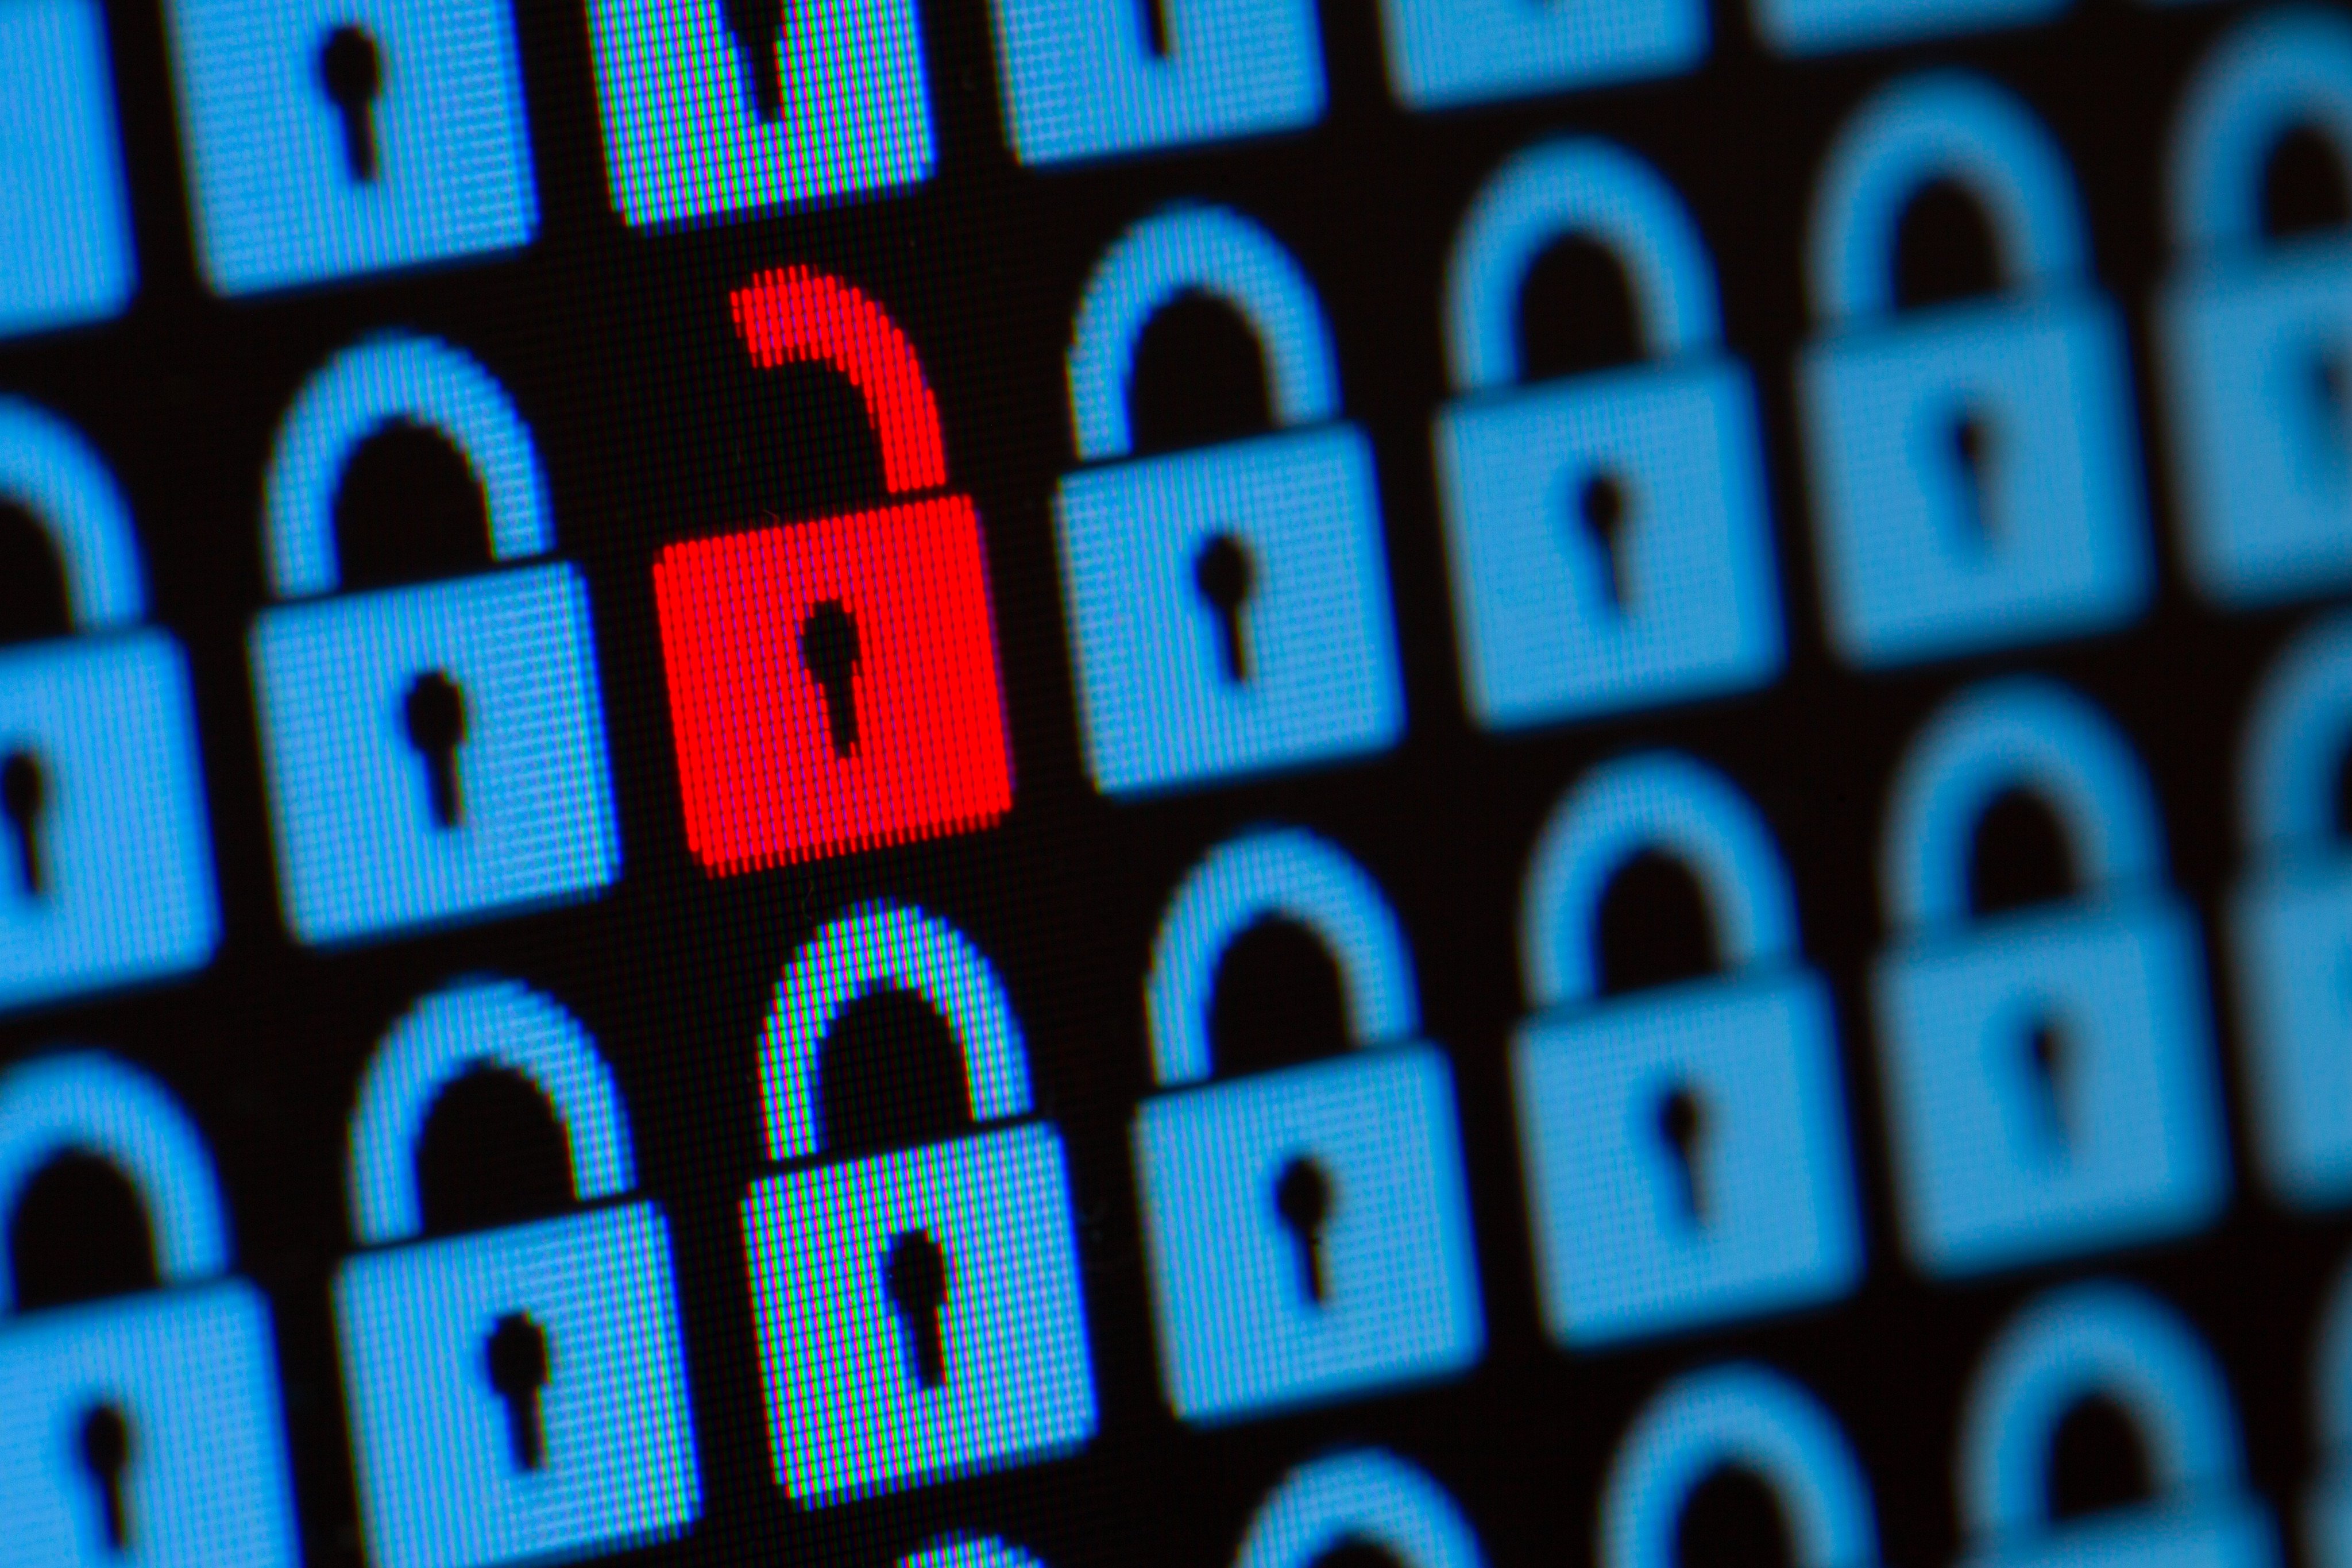 Experts appeal to the government to centralise cybersecurity defence to better fend off hackers. Photo: Shutterstock